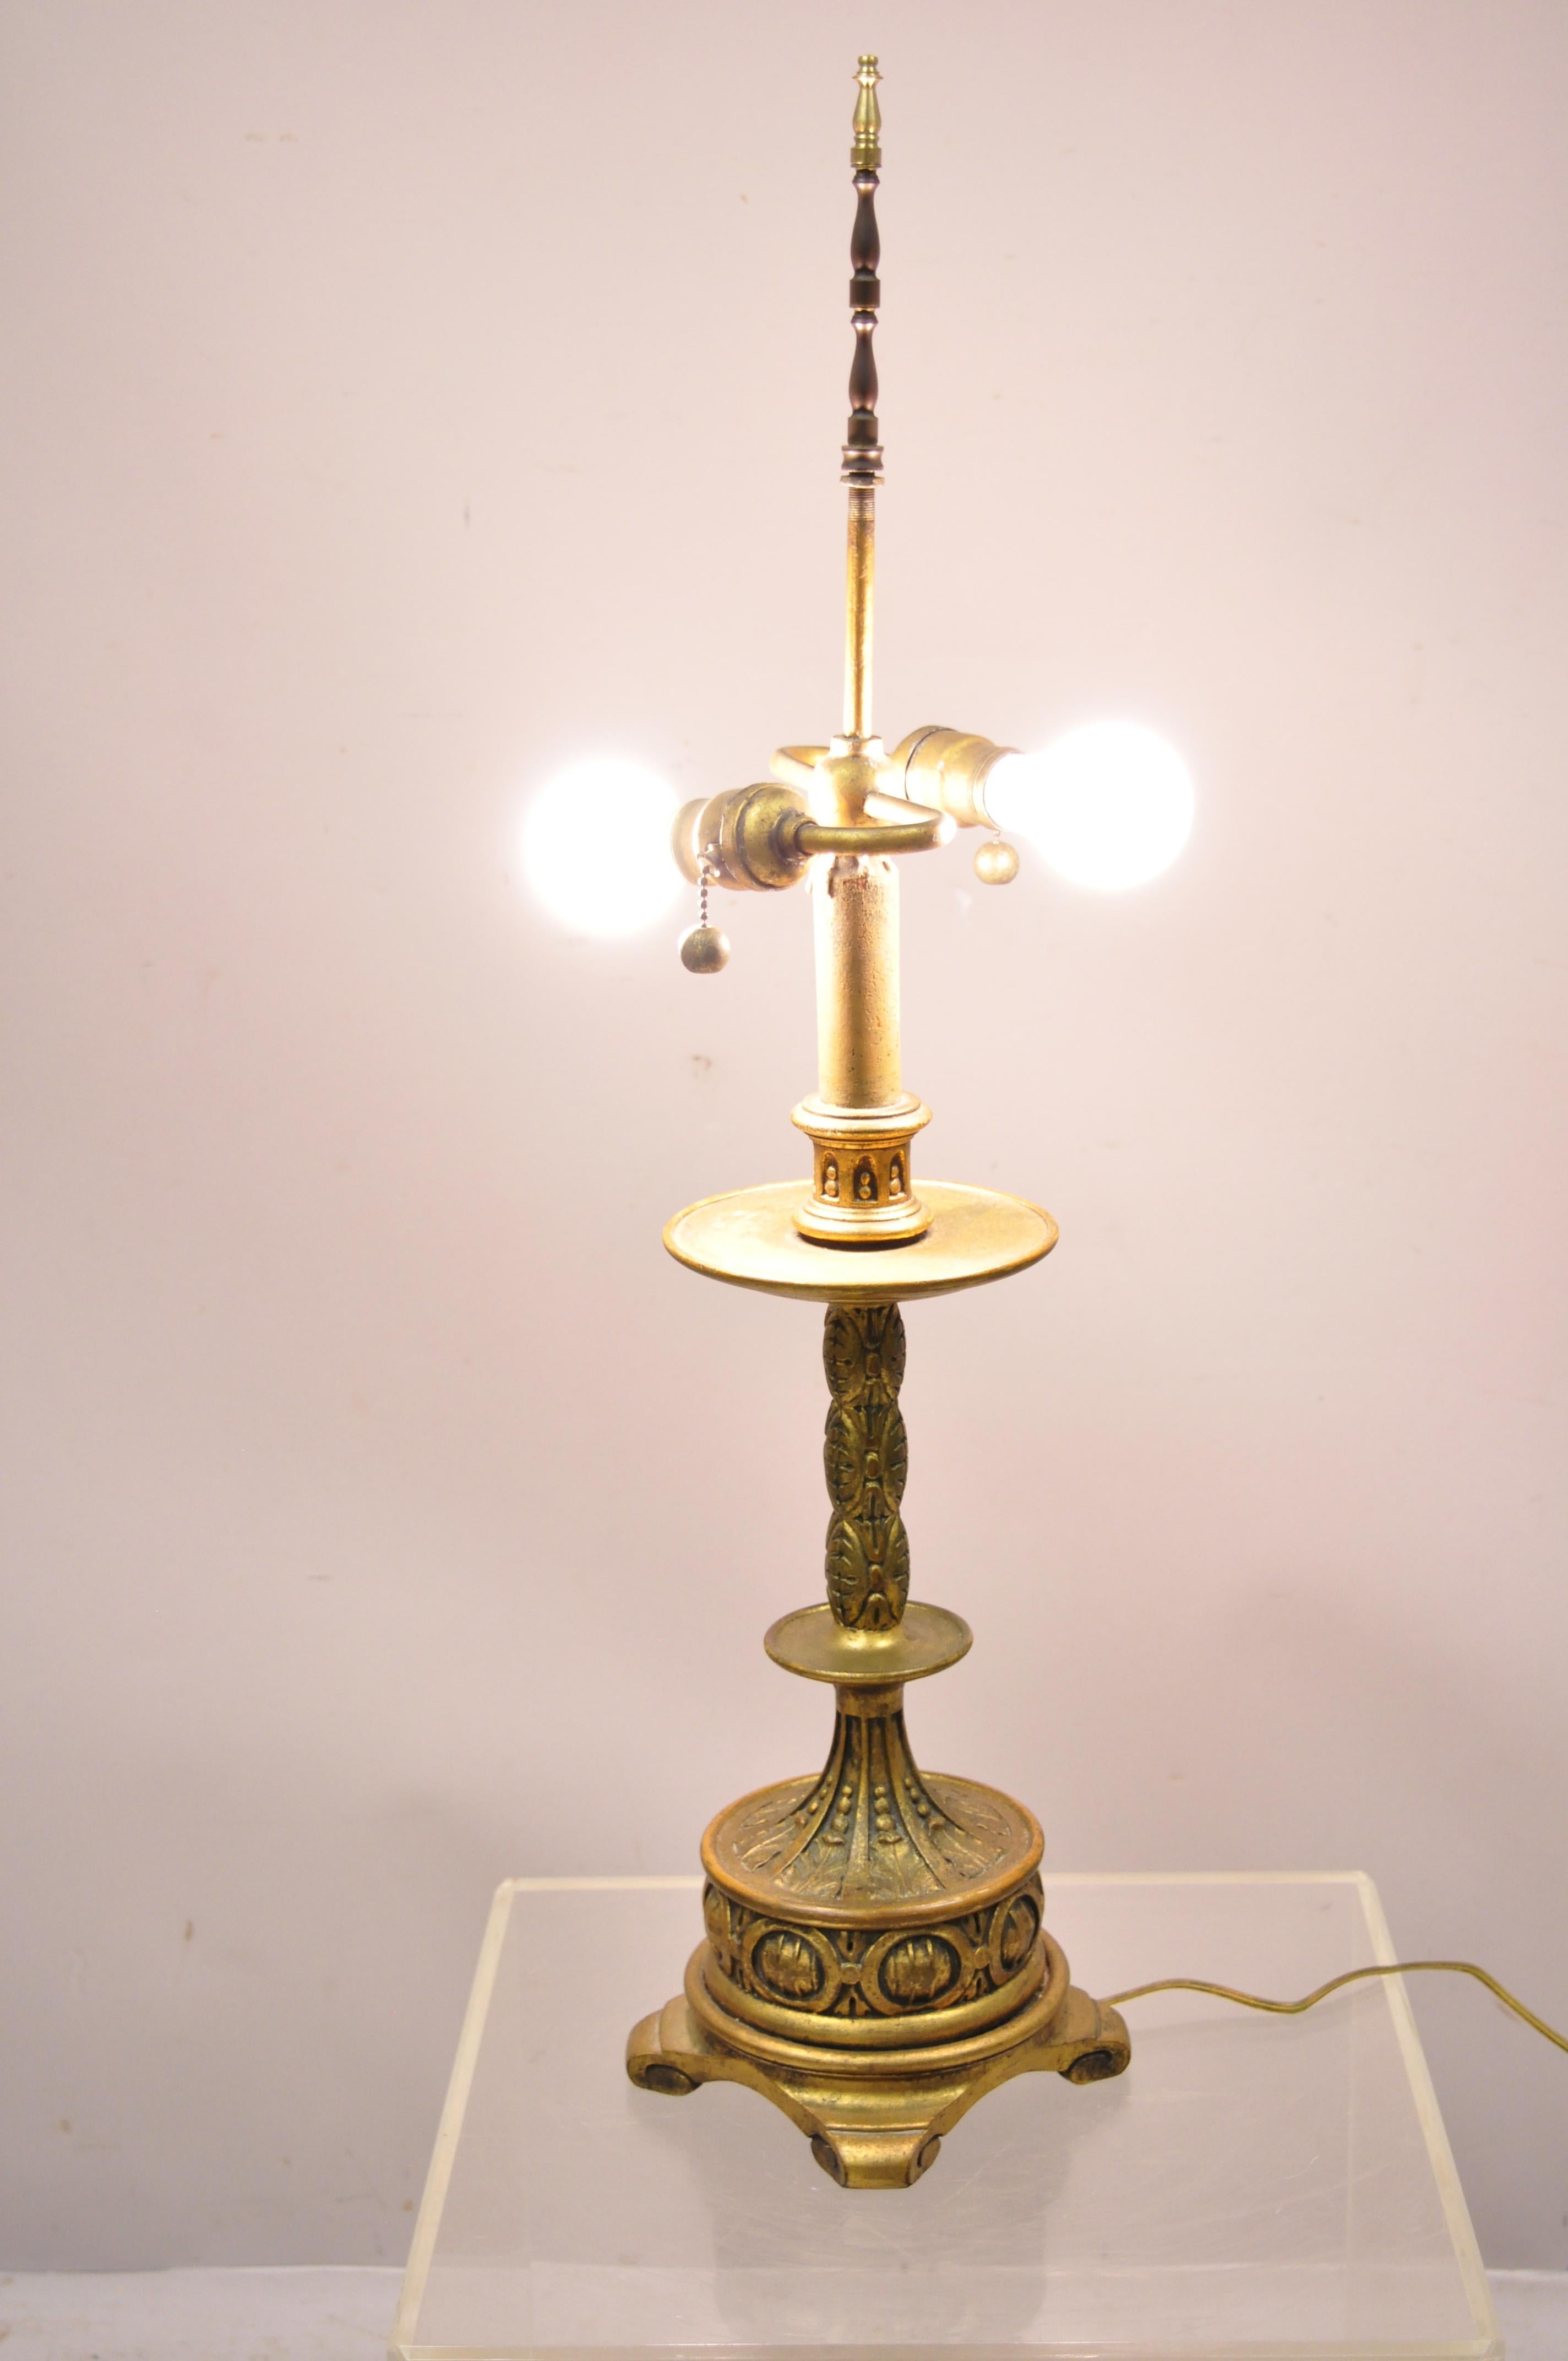 Vintage Italian gold giltwood carved candle candelabrum Florentine table lamp. Item features 2 light sockets, solid wood construction, gold distressed finish, nicely carved details, very nice antique item, circa early to mid-1900s. Measurements: